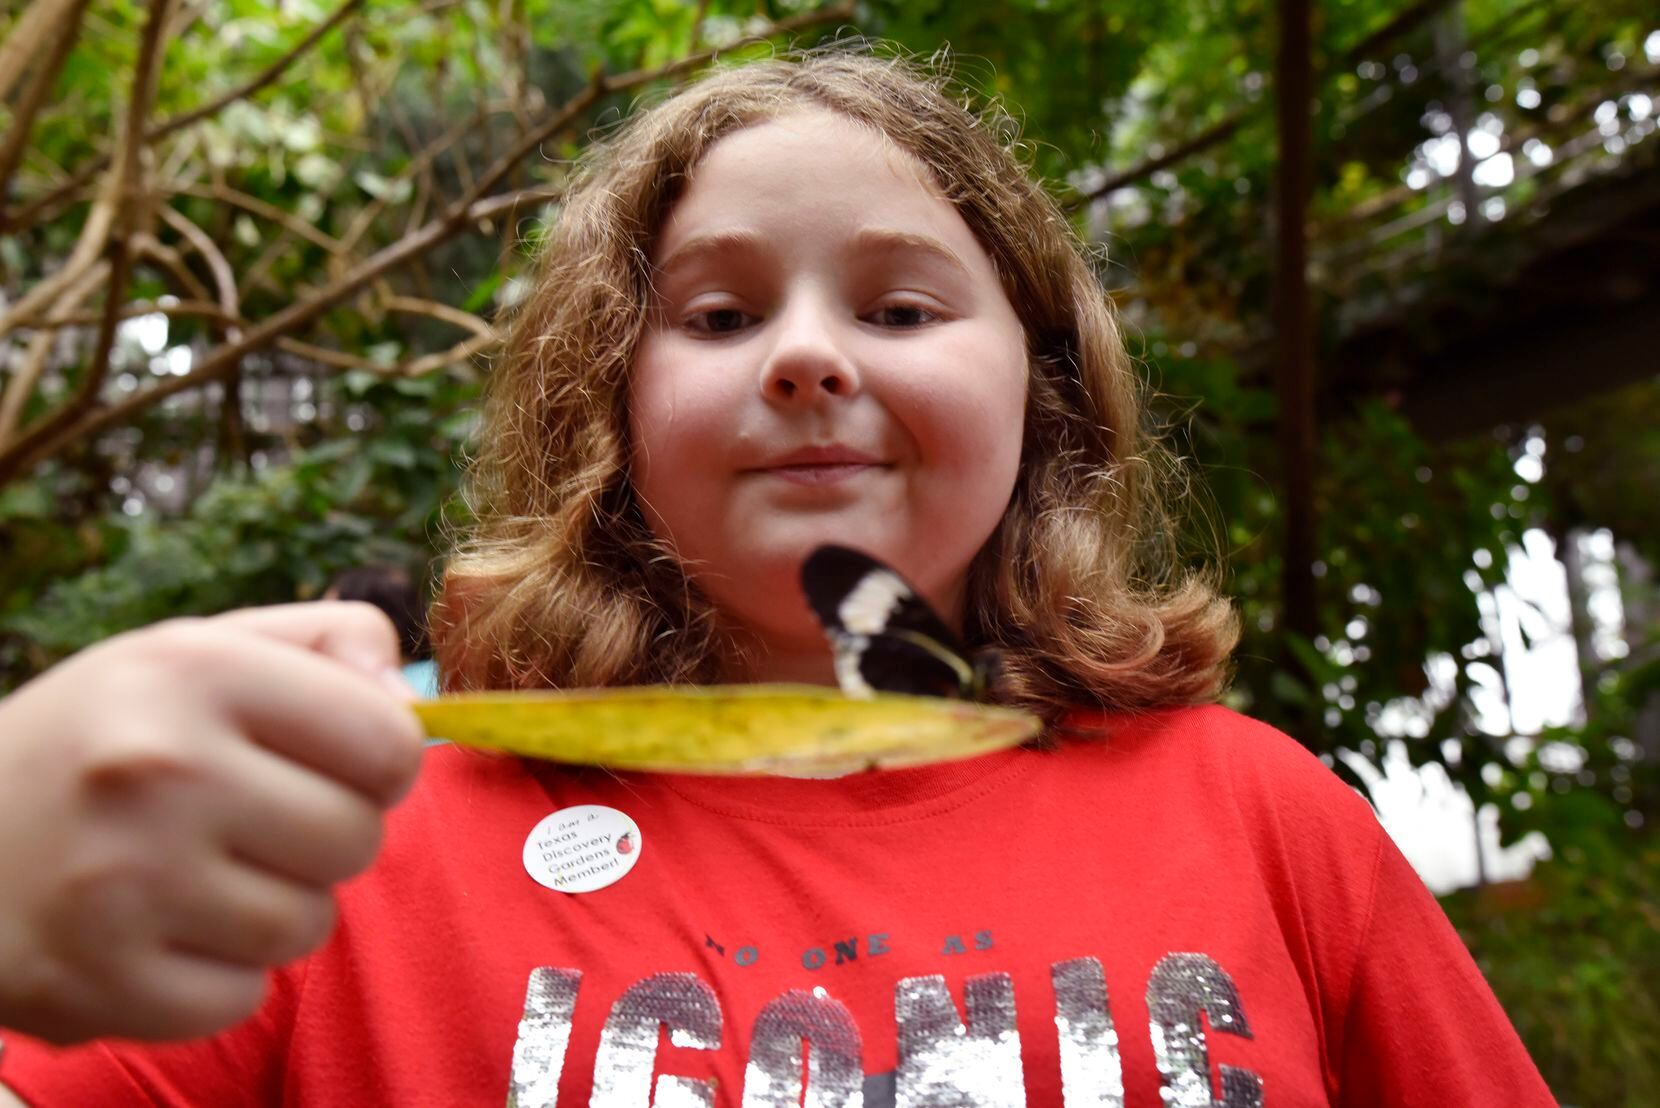 Emma Liles, 10, of Houston gets a close look at a butterfly in the Rosine Smith Sammons Butterfly House and Insectarium at Texas Discovery Gardens.